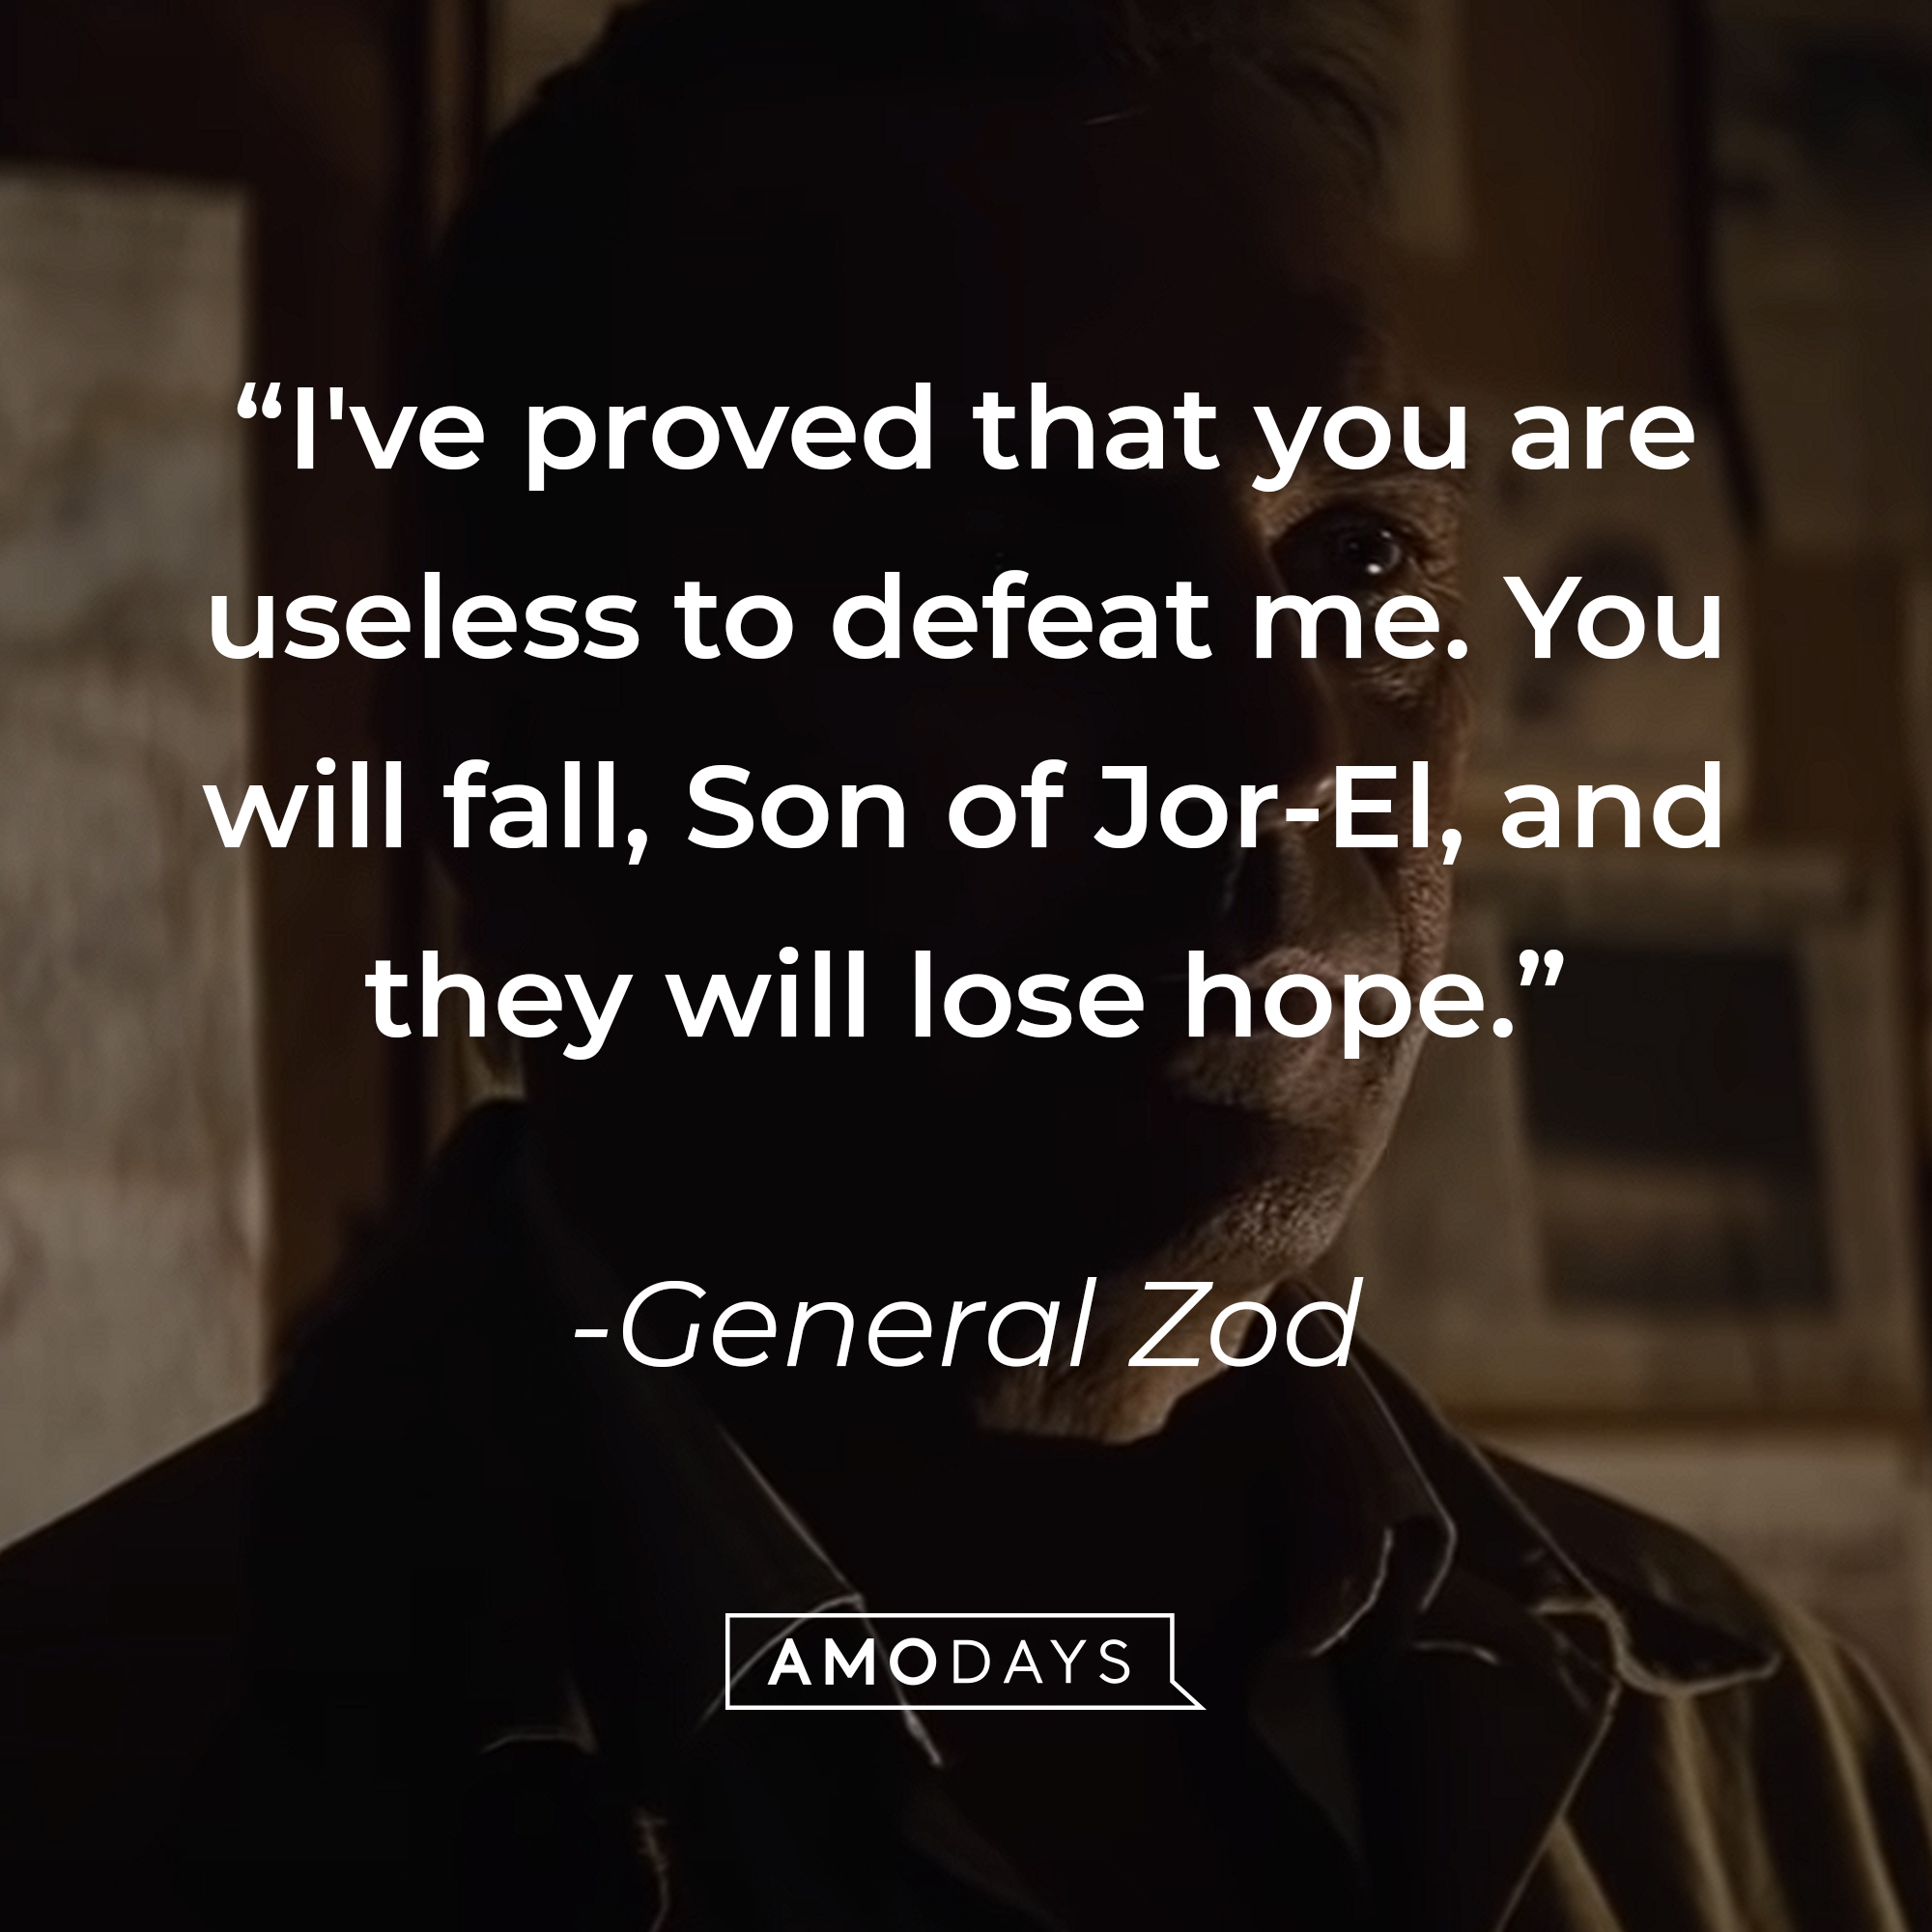 General Zod's quote: "I've proved that you are useless to defeat me. You will fall, Son of Jor-El, and they will lose hope." | Source: Youtube.com/WarnerBrosPictures